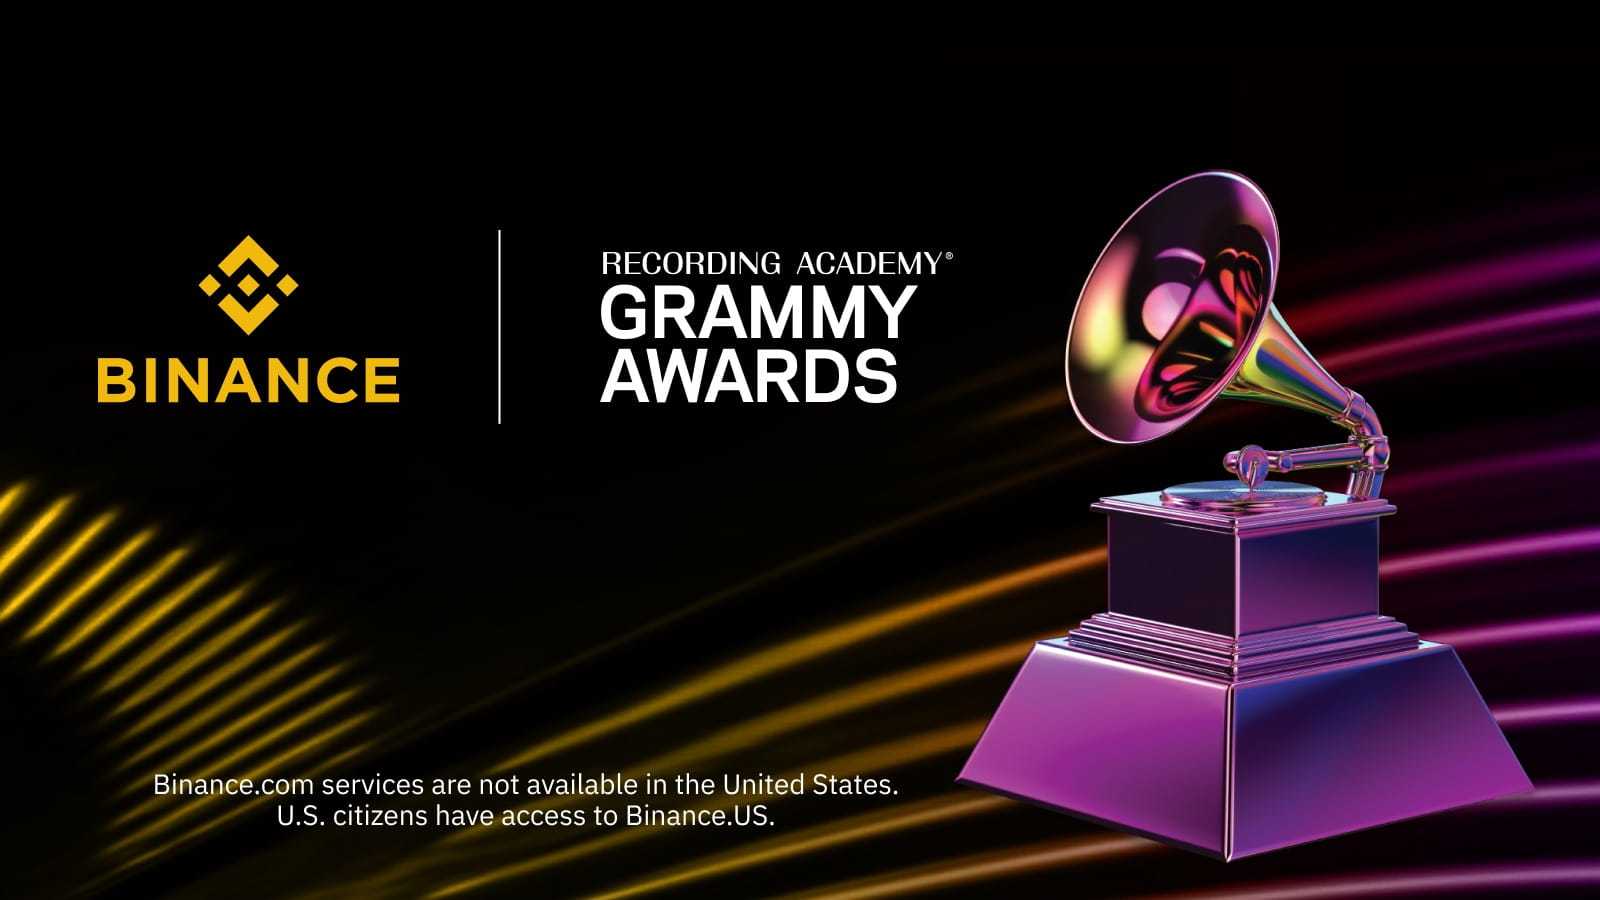 Binance is considered the most suitable partner for grammys mission: "empowering music makers around the world"